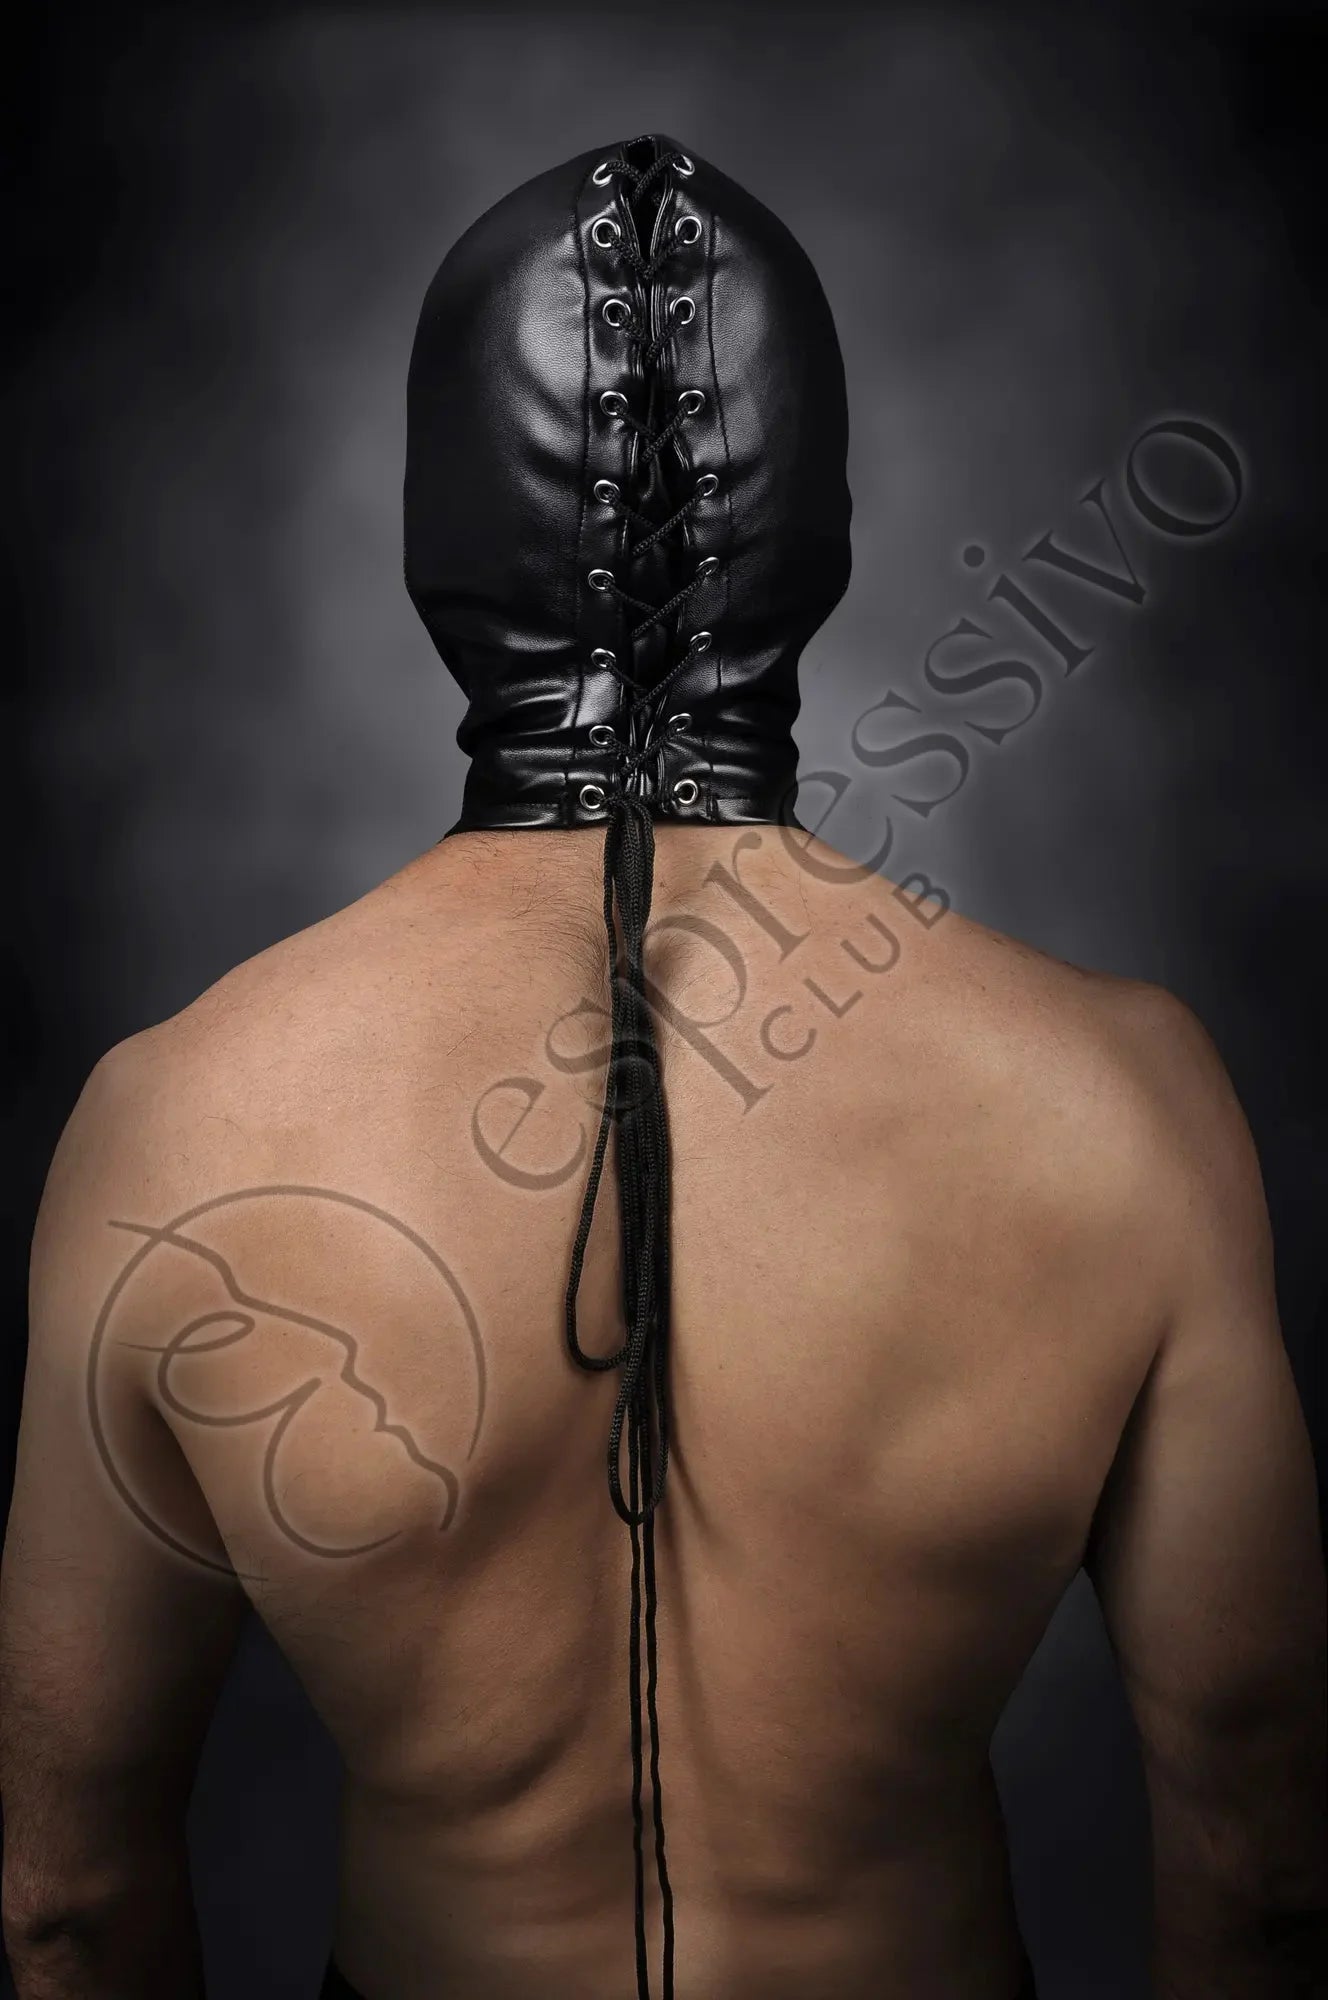 Open Mouth Cocksucker Hood for Extreme Bondage